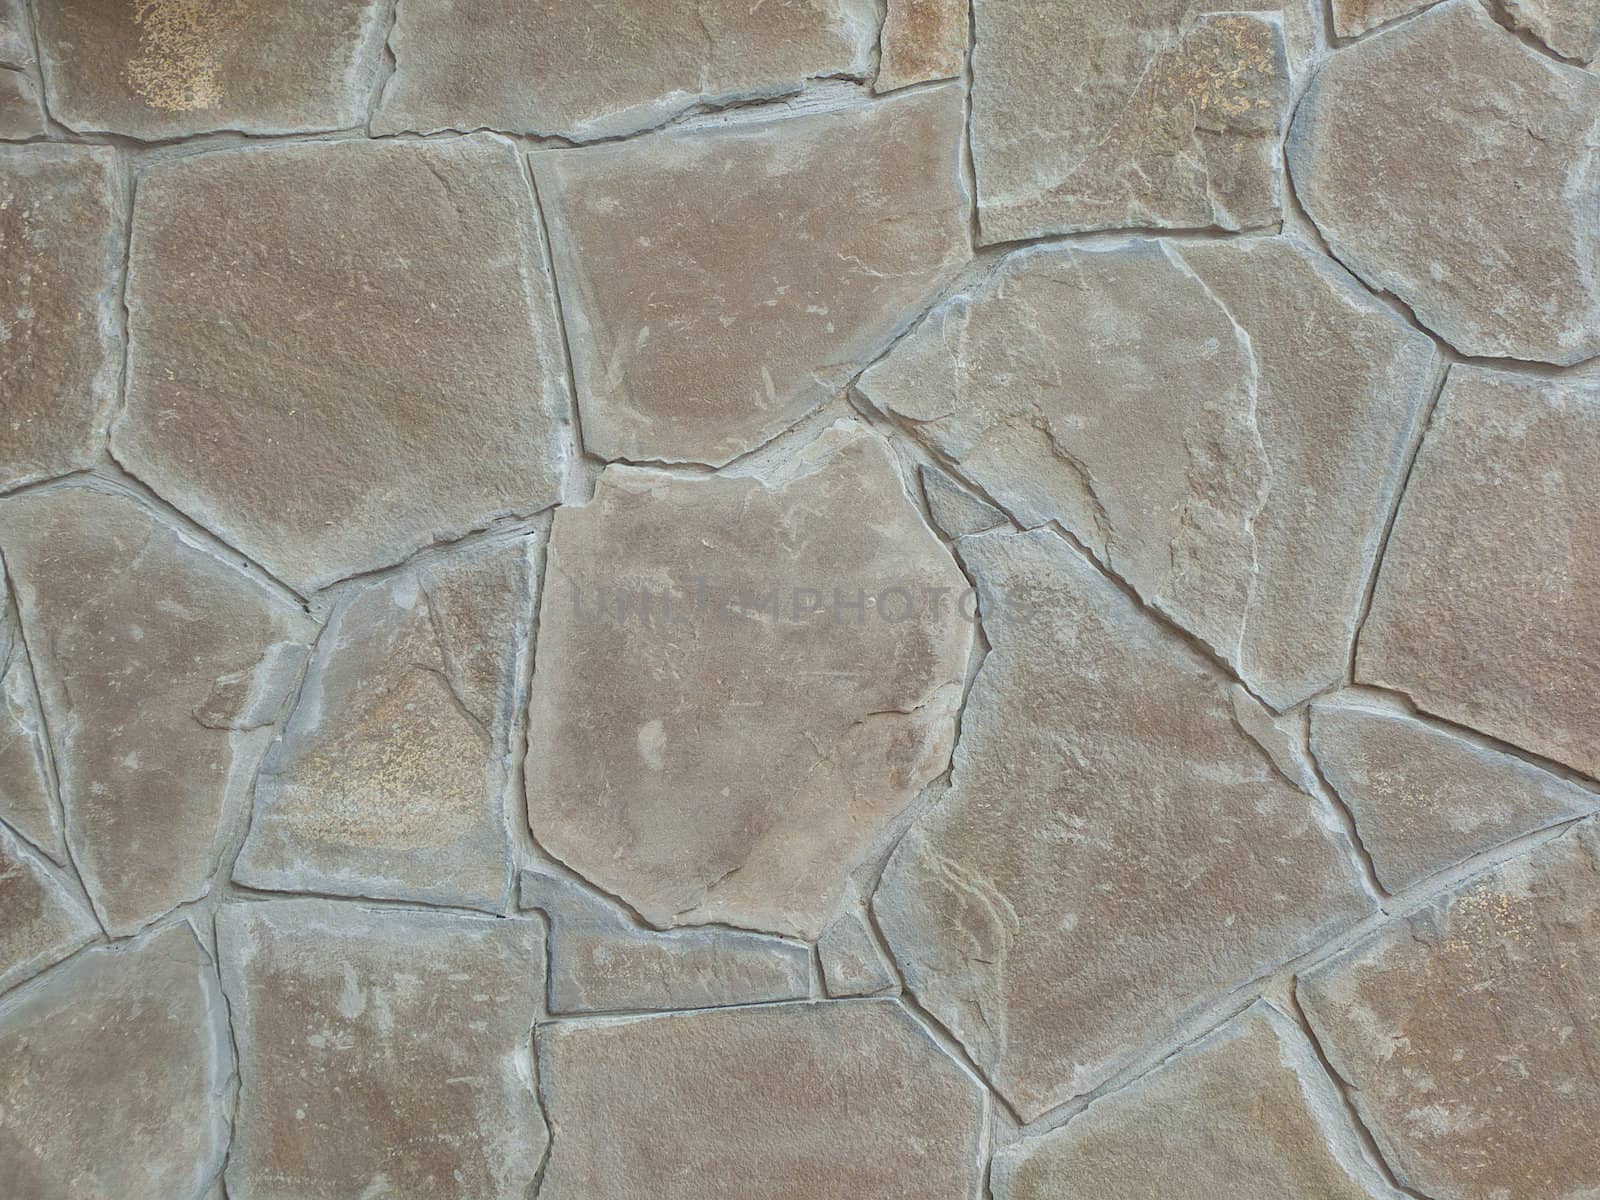 Background and texture from a wall trimmed with a stone